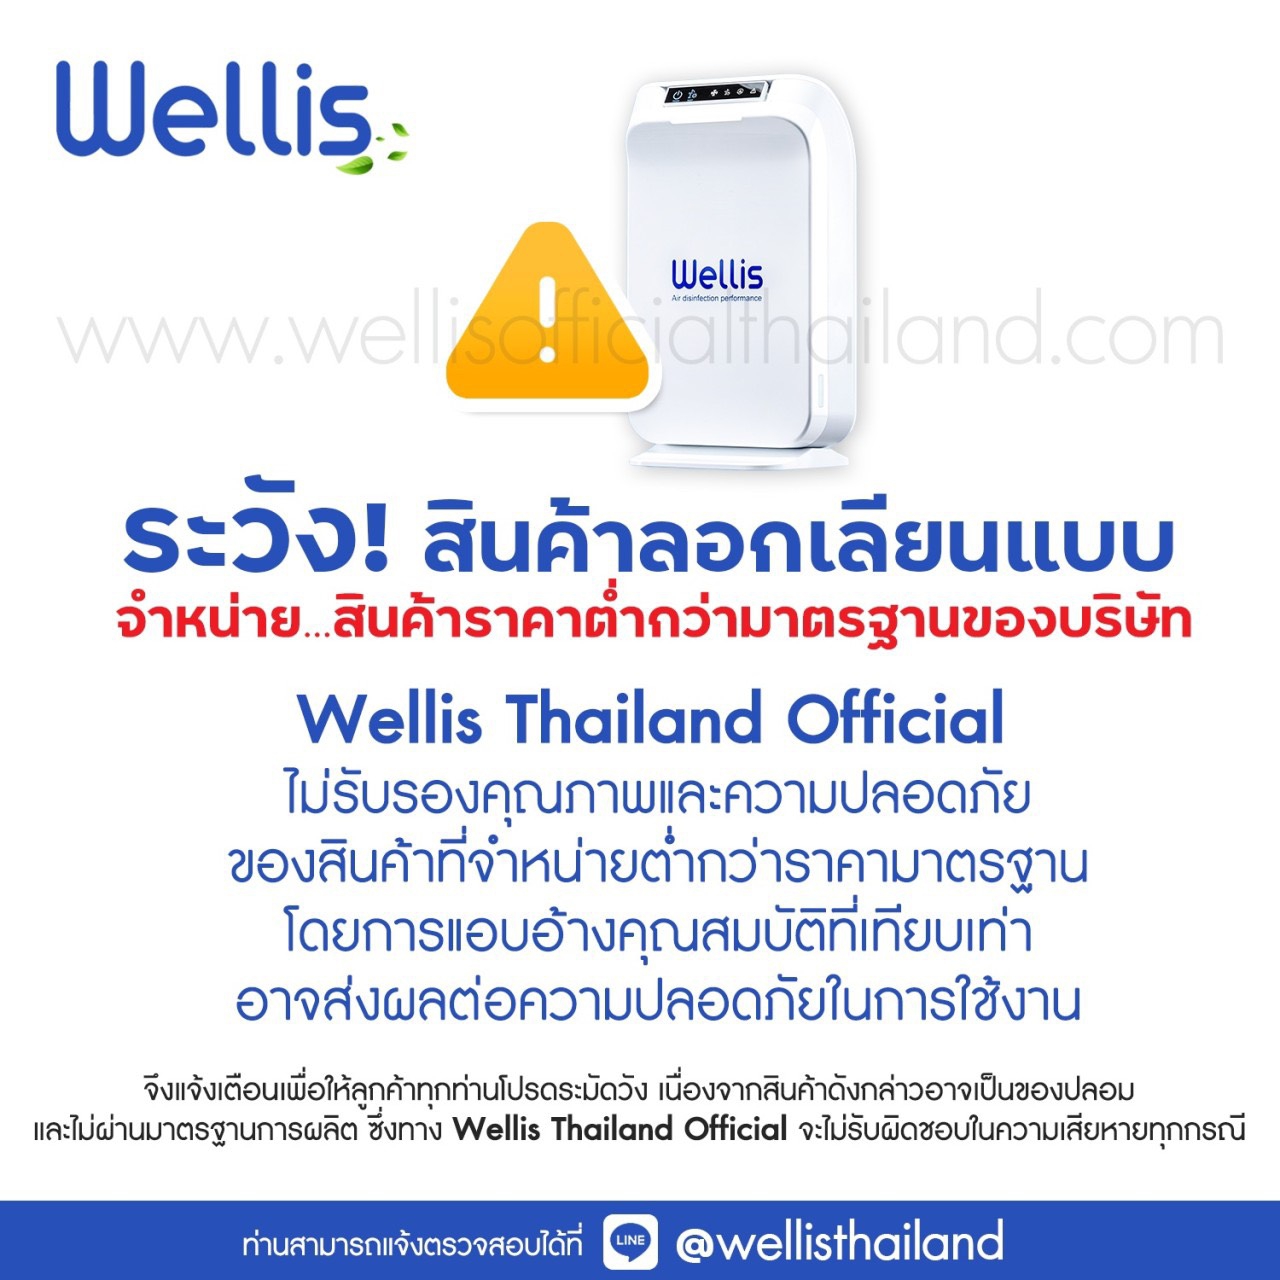 Wellis Air Disinfection Purifier Certificate Example